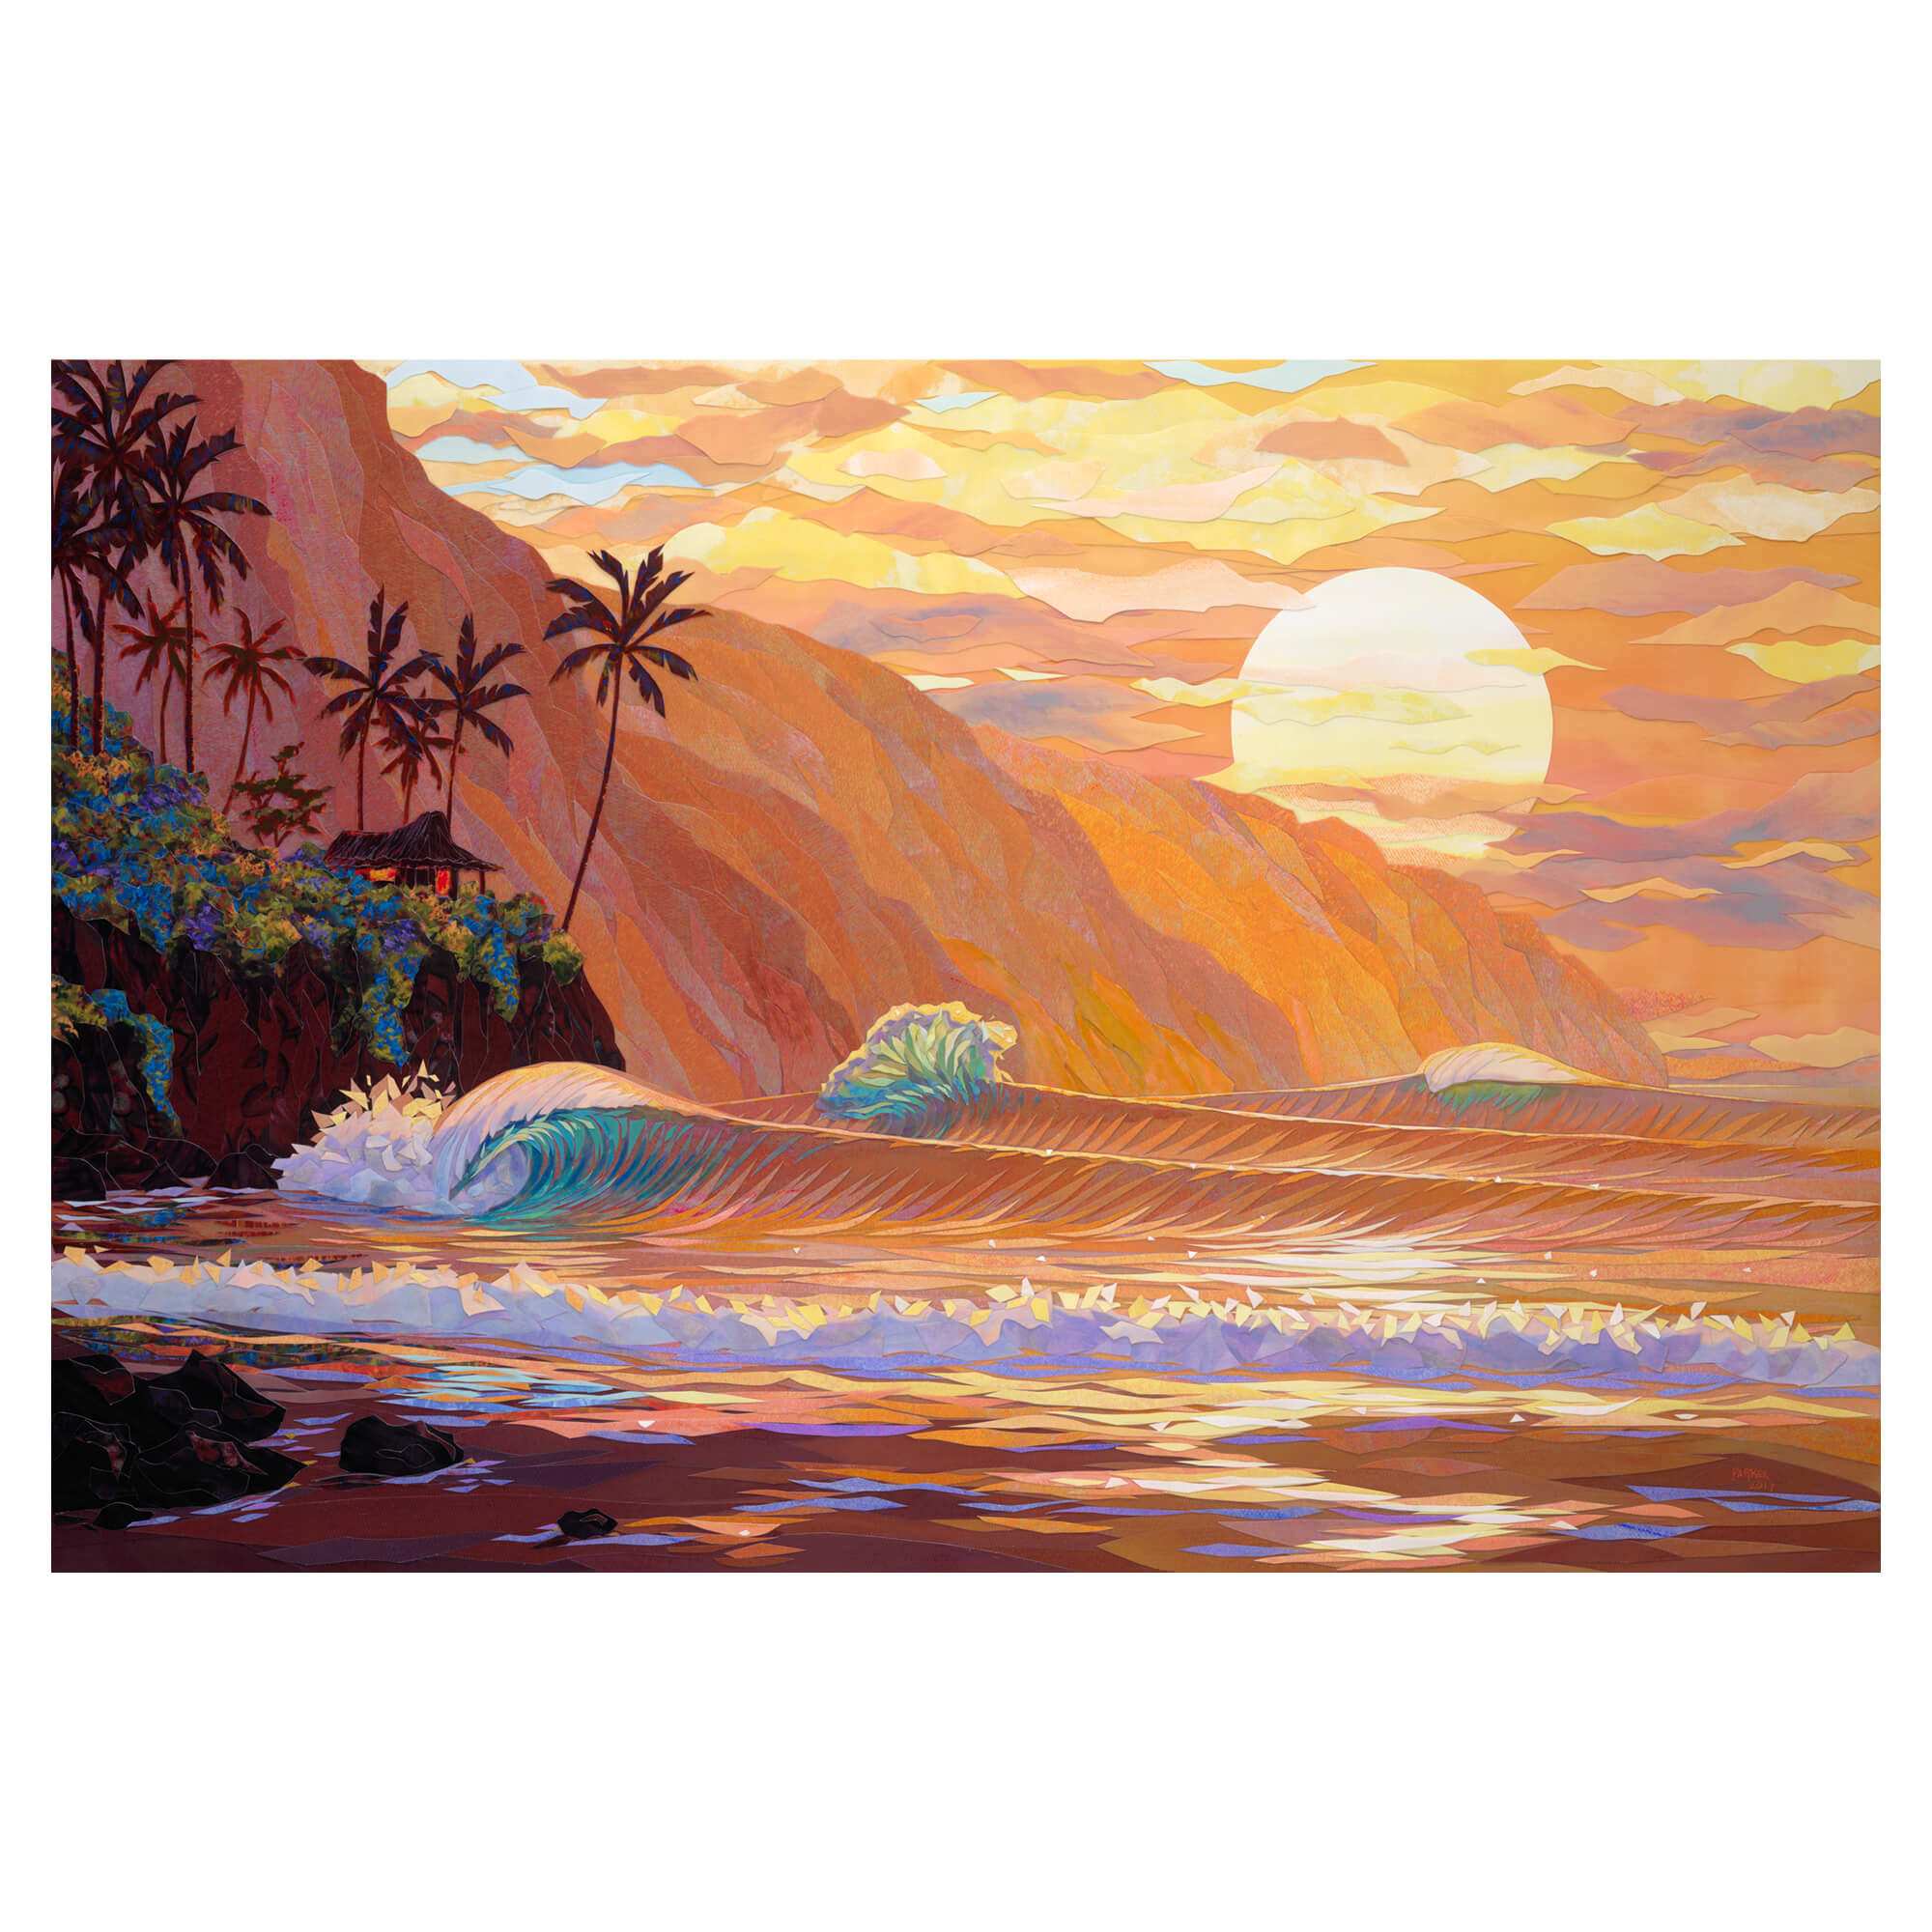 A matted art print featuring a collage of a sunset view of the ocean as seen from a tropical beach in Hawaii by Hawaii artist Patrick Parker